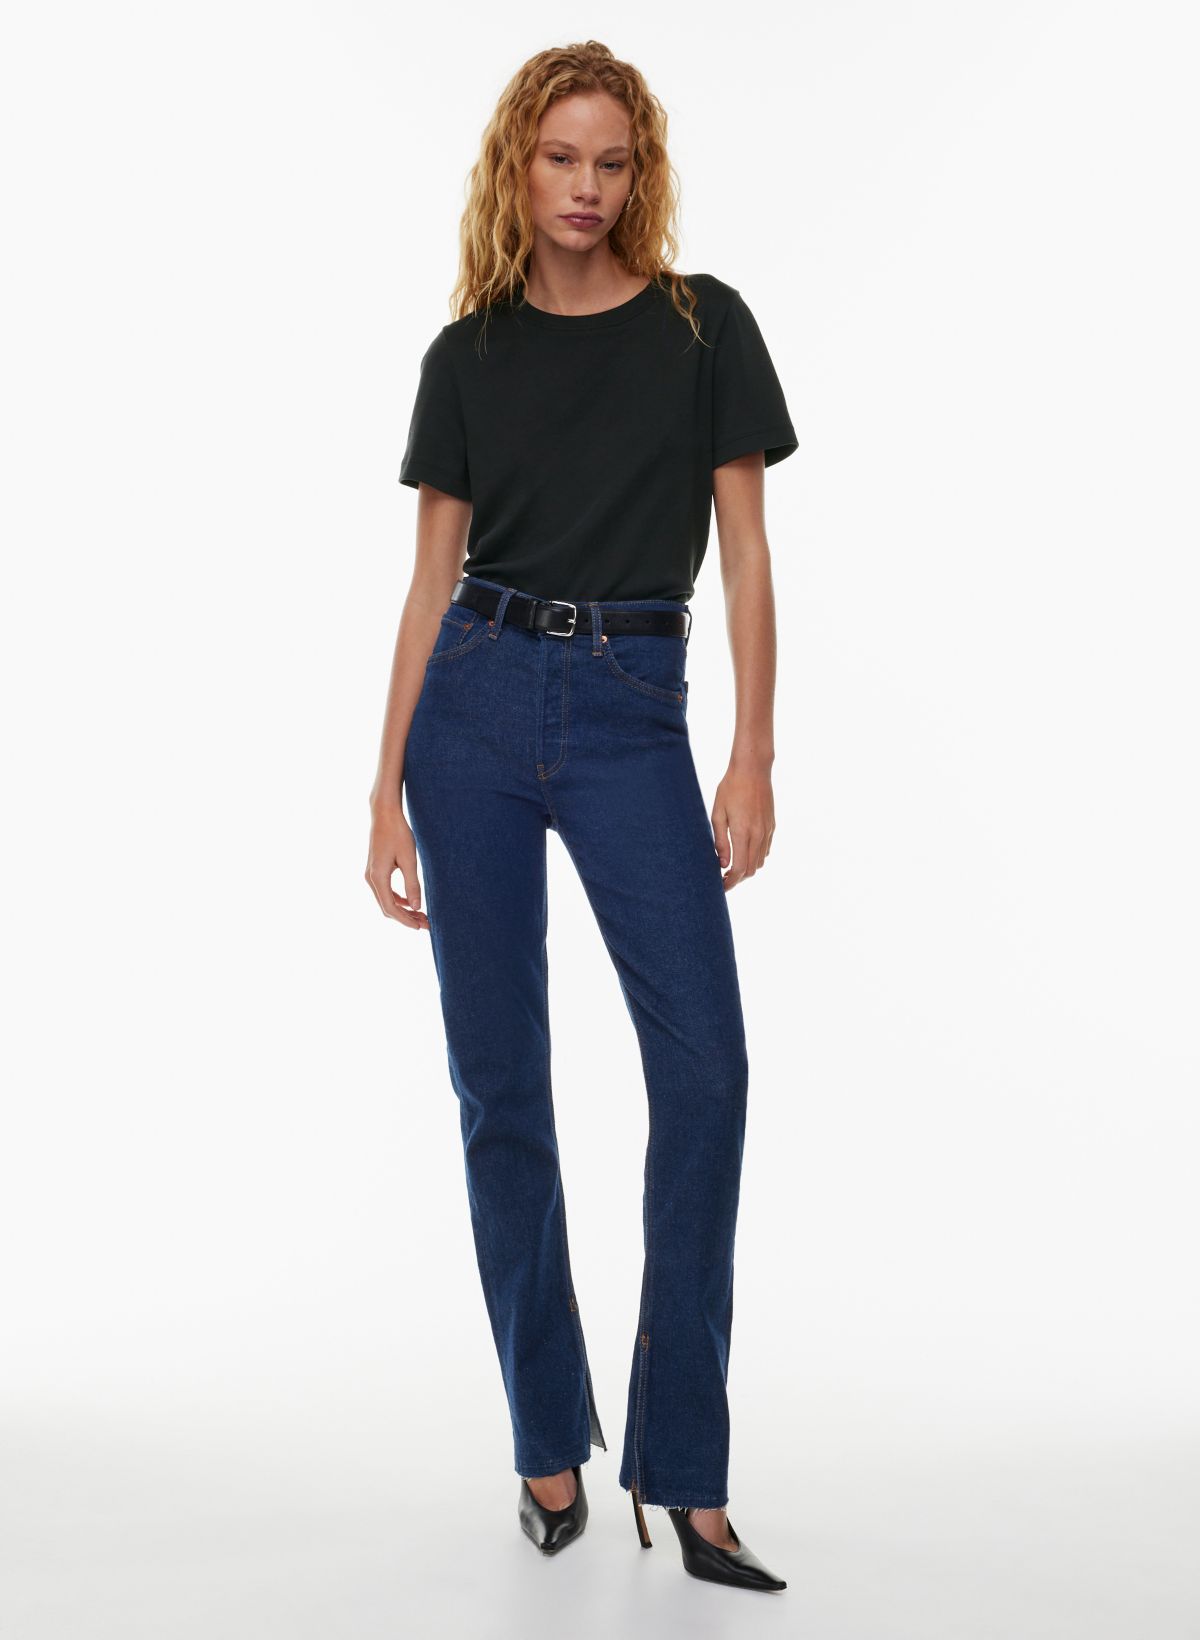 Buy Black Super Soft Bootcut Jeans from Next Canada